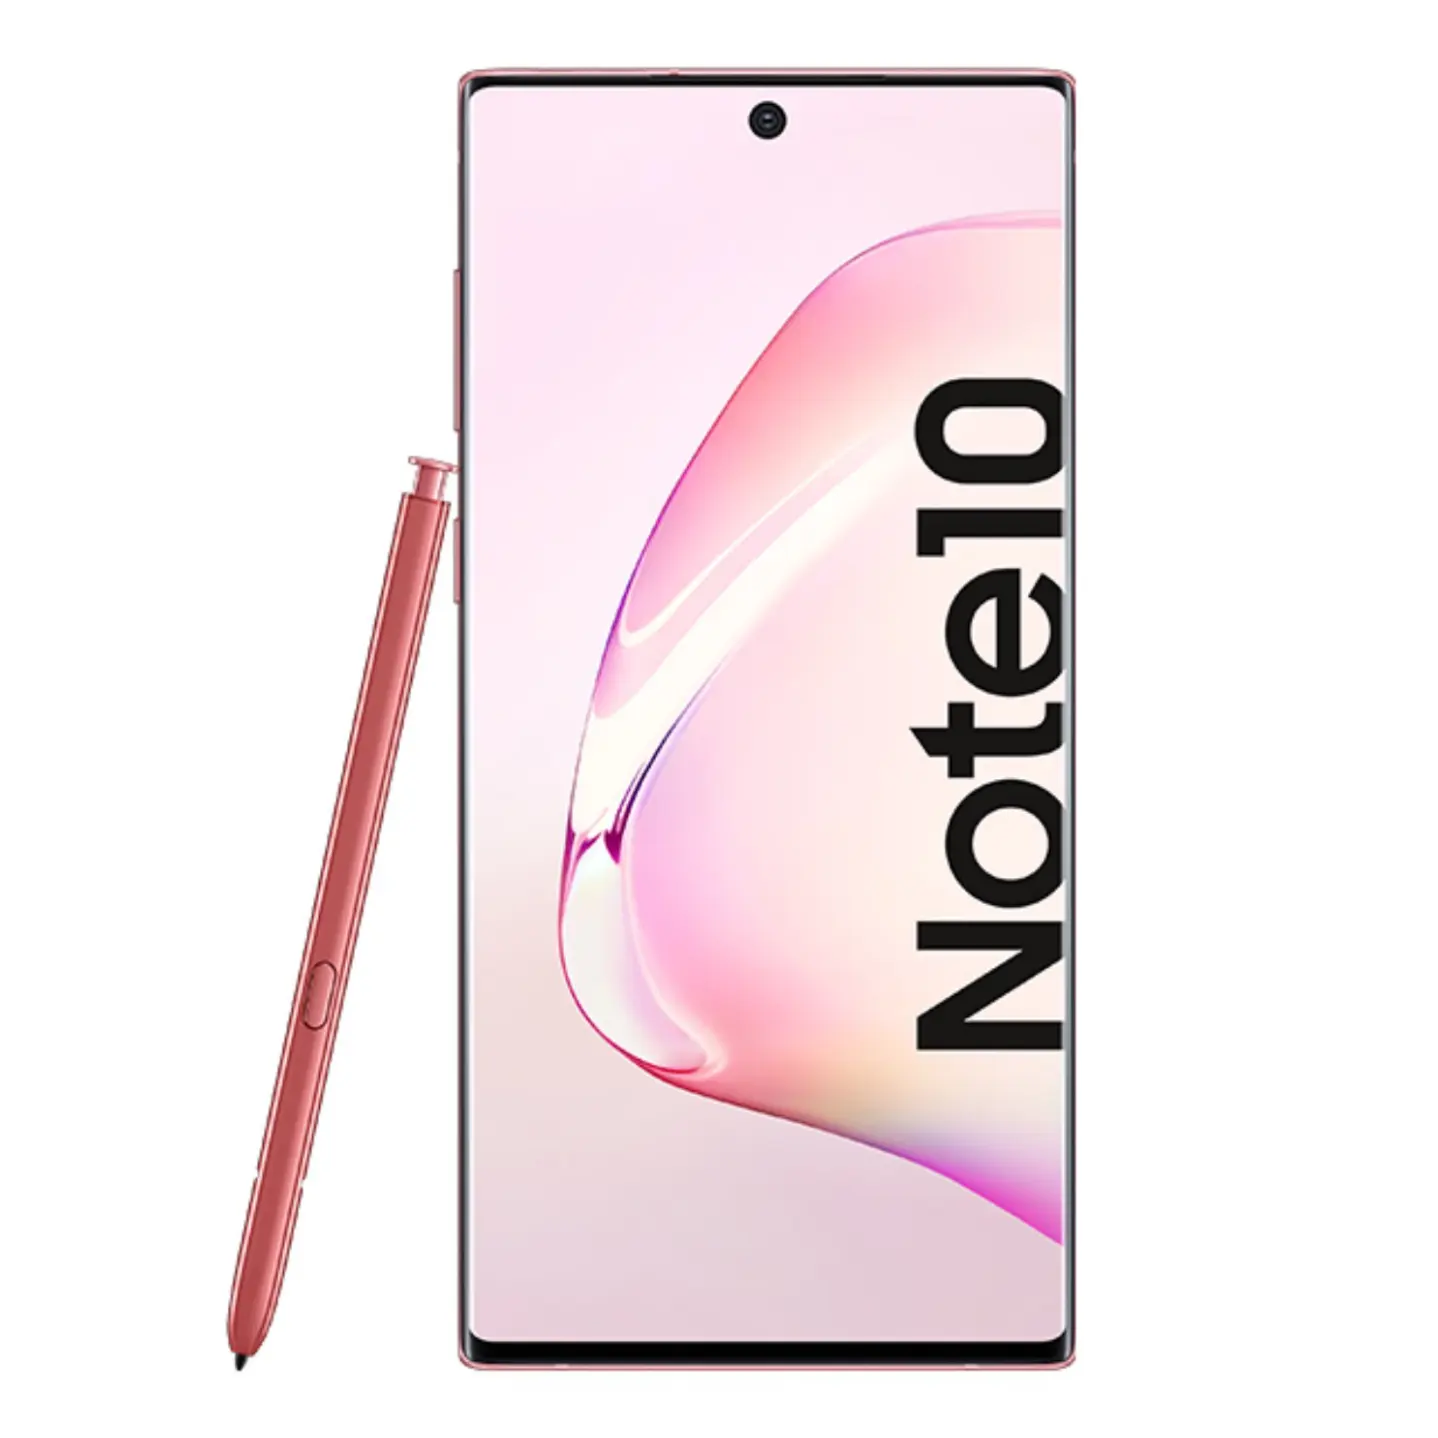 Galaxy Note 10 Mobile Phone Mobiles for Note 10 Plus High Quality Used Smartphone without Accessories No Scratch Samsung 12MP 8g